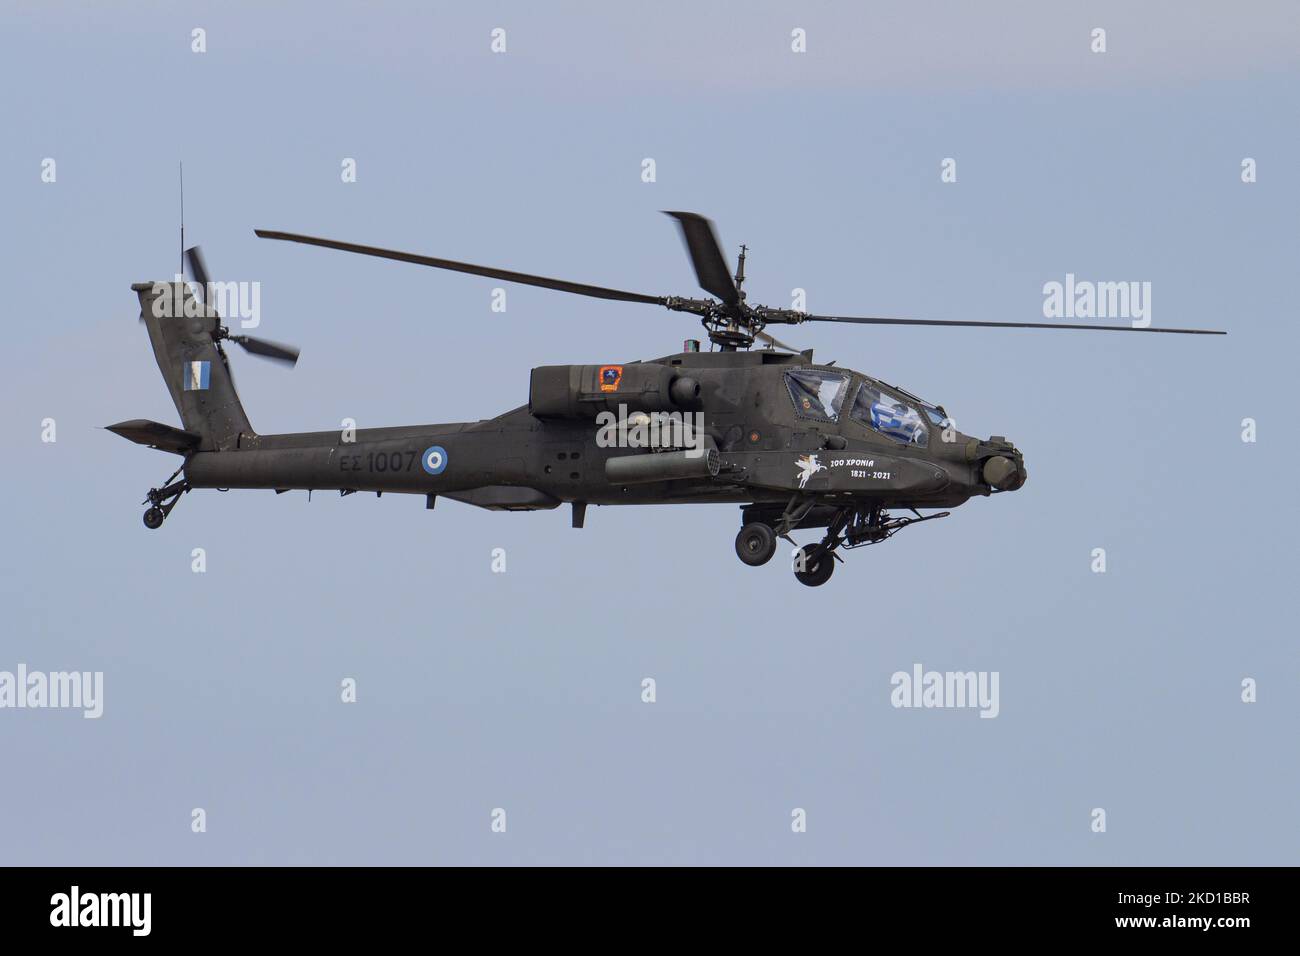 A Boeing AH-64 Apache helicopter from the Greek Army as seen flying and manoeuvering during a flying display demonstration during Athens Flying Week 2021 Air Show at Tanagra Air Base Airport. The Apache of the Hellenic military is the AH-64D Apache Longbow version. The specific aircraft is a twin turboshaft attack combat helicopter under the fuselage and on the wings with a machine gun, missiles, rocket and self defense capabilities. Greece, a country with strong air force is a member state of the North Atlantic Treaty Organization NATO. Tanagra, Greece on September 5, 2021 (Photo by Nicolas E Stock Photo